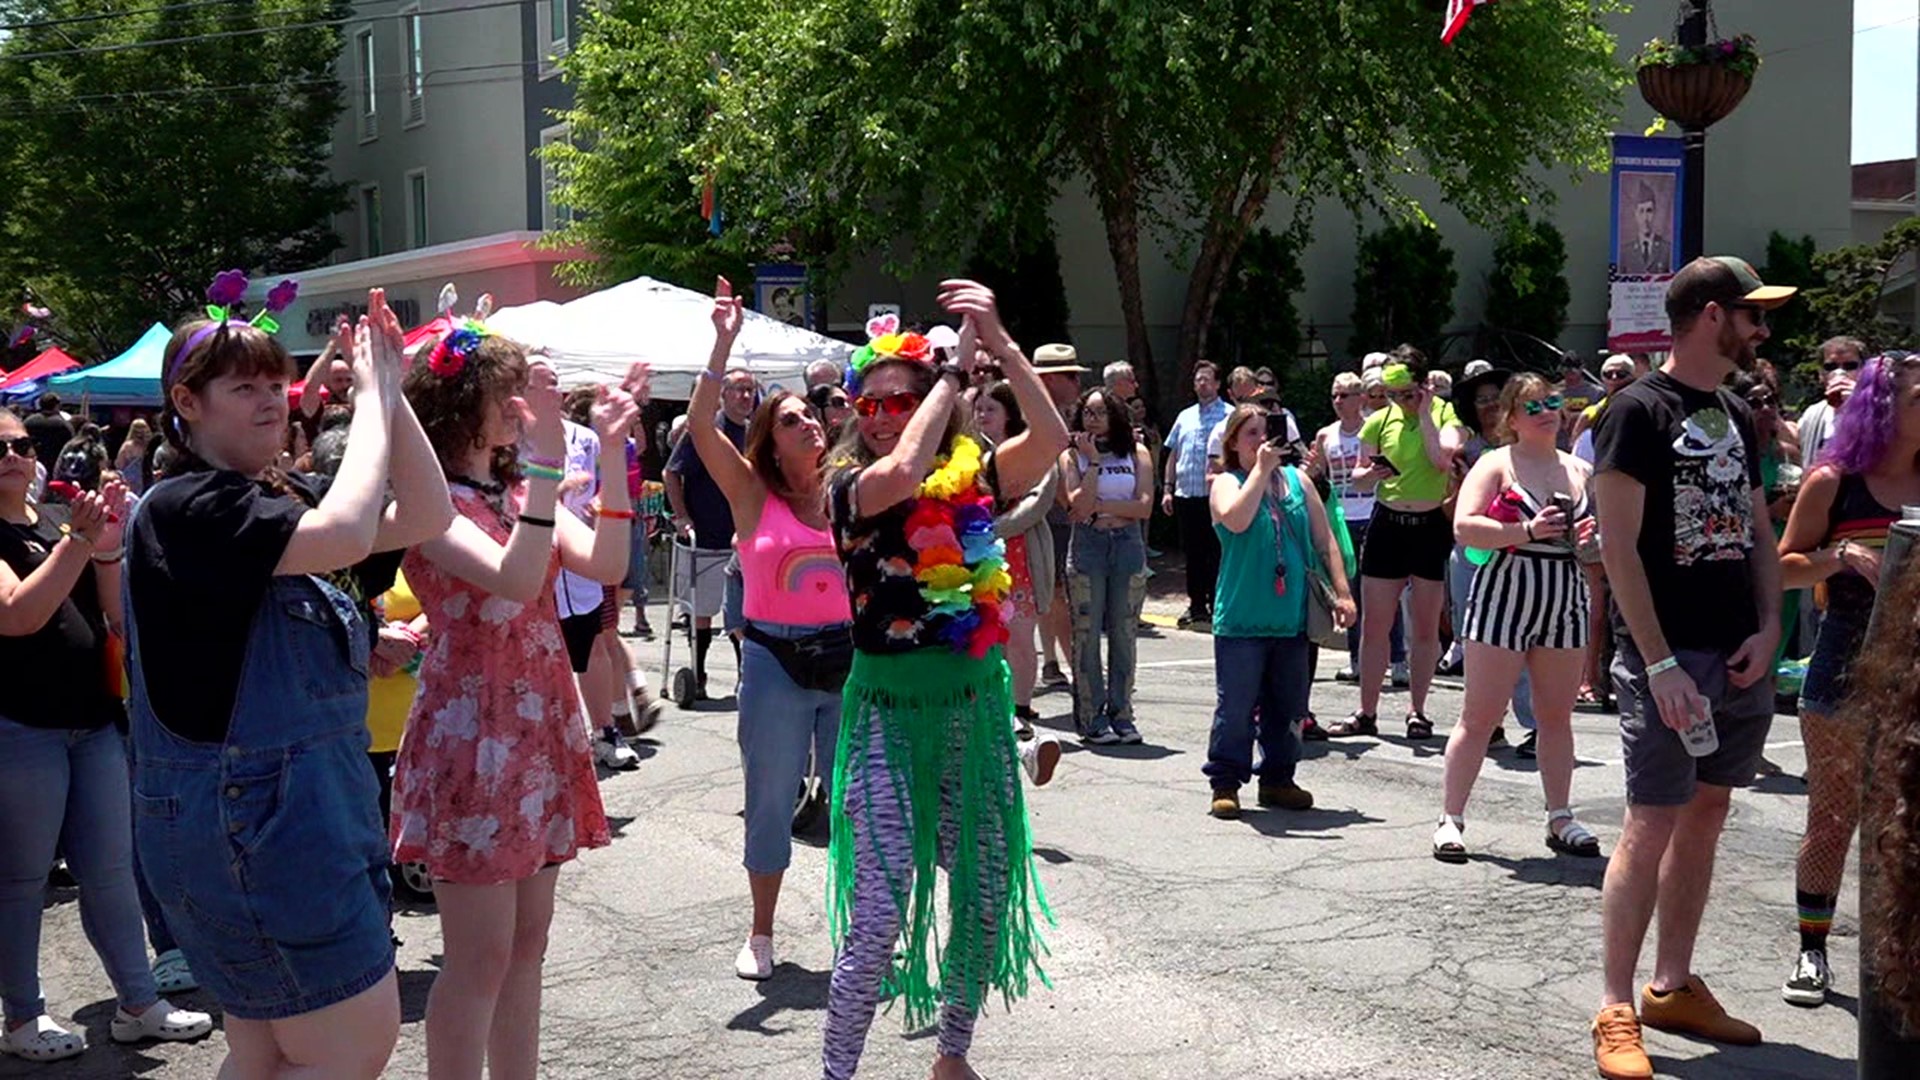 It was the first of many pride festivals in our area, and organizers of the event are hoping to inspire a more inclusive future.